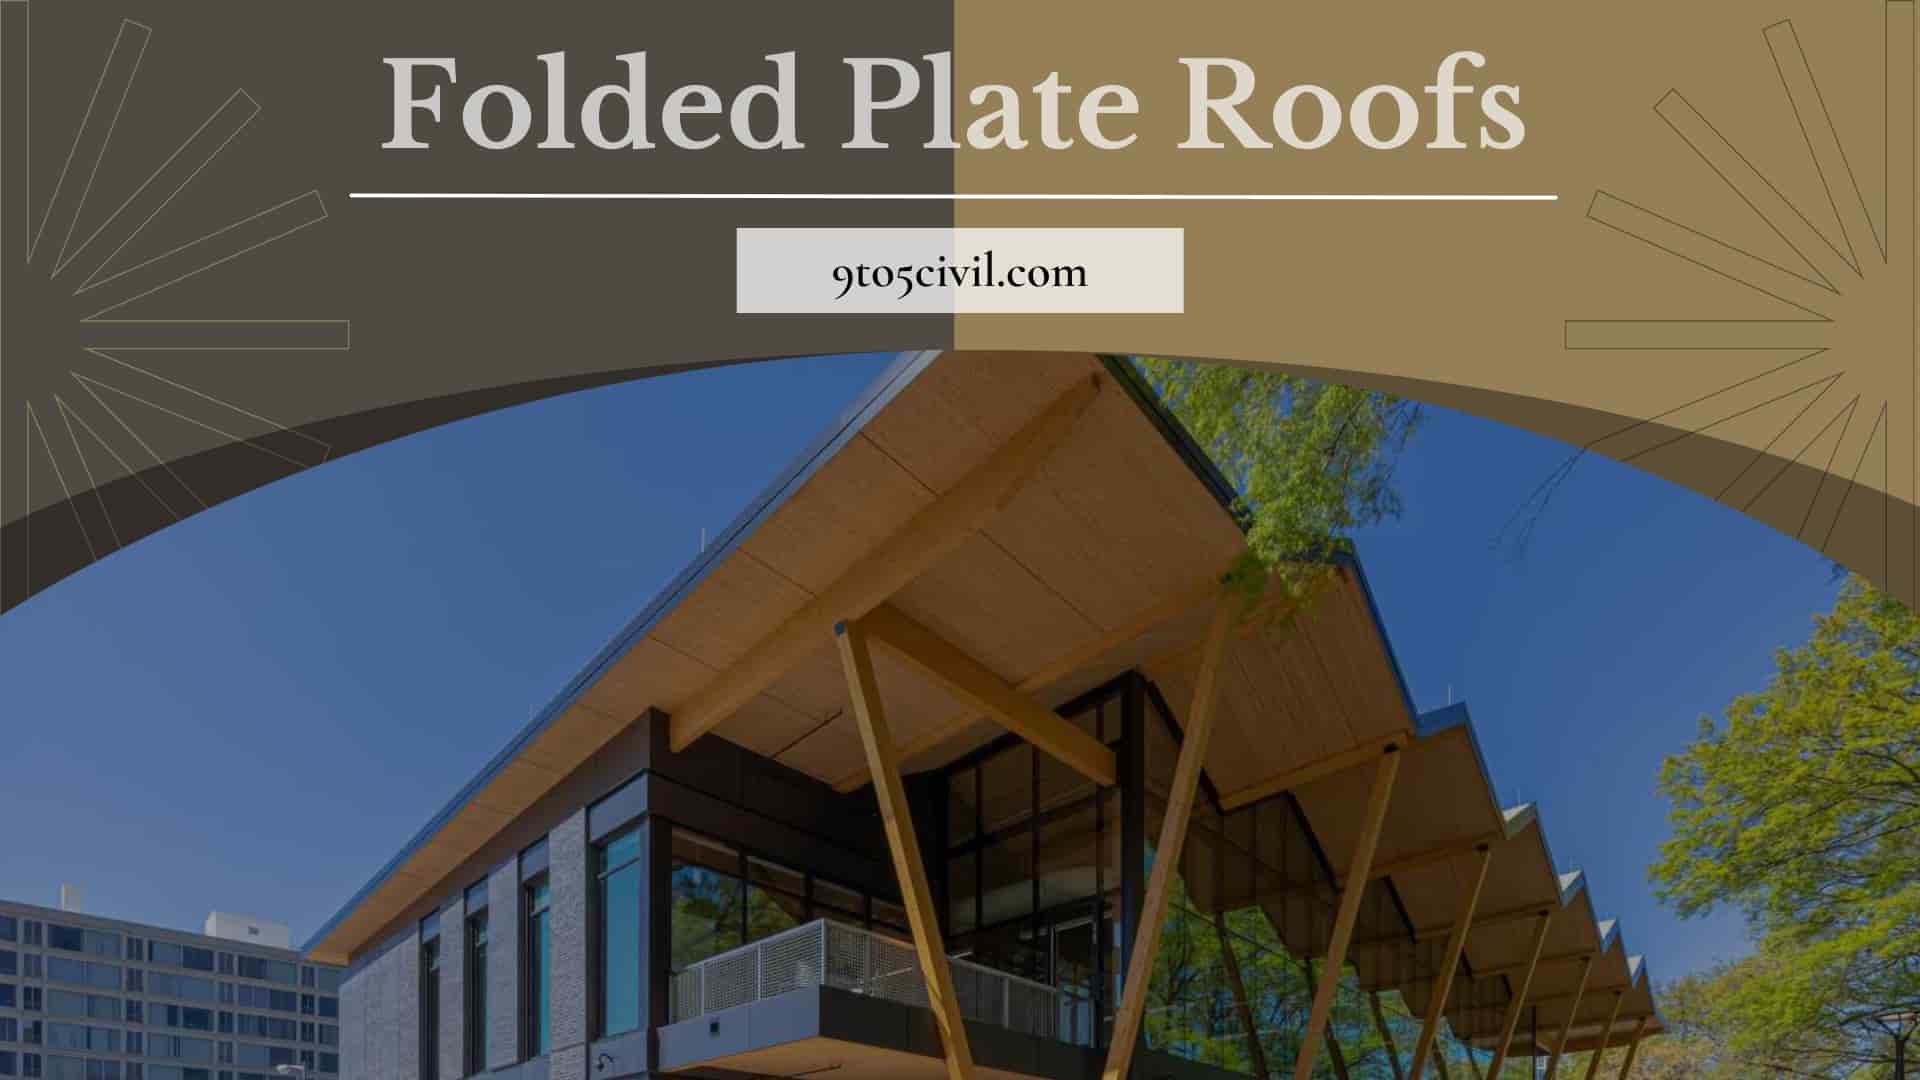 Folded Plate Roofs